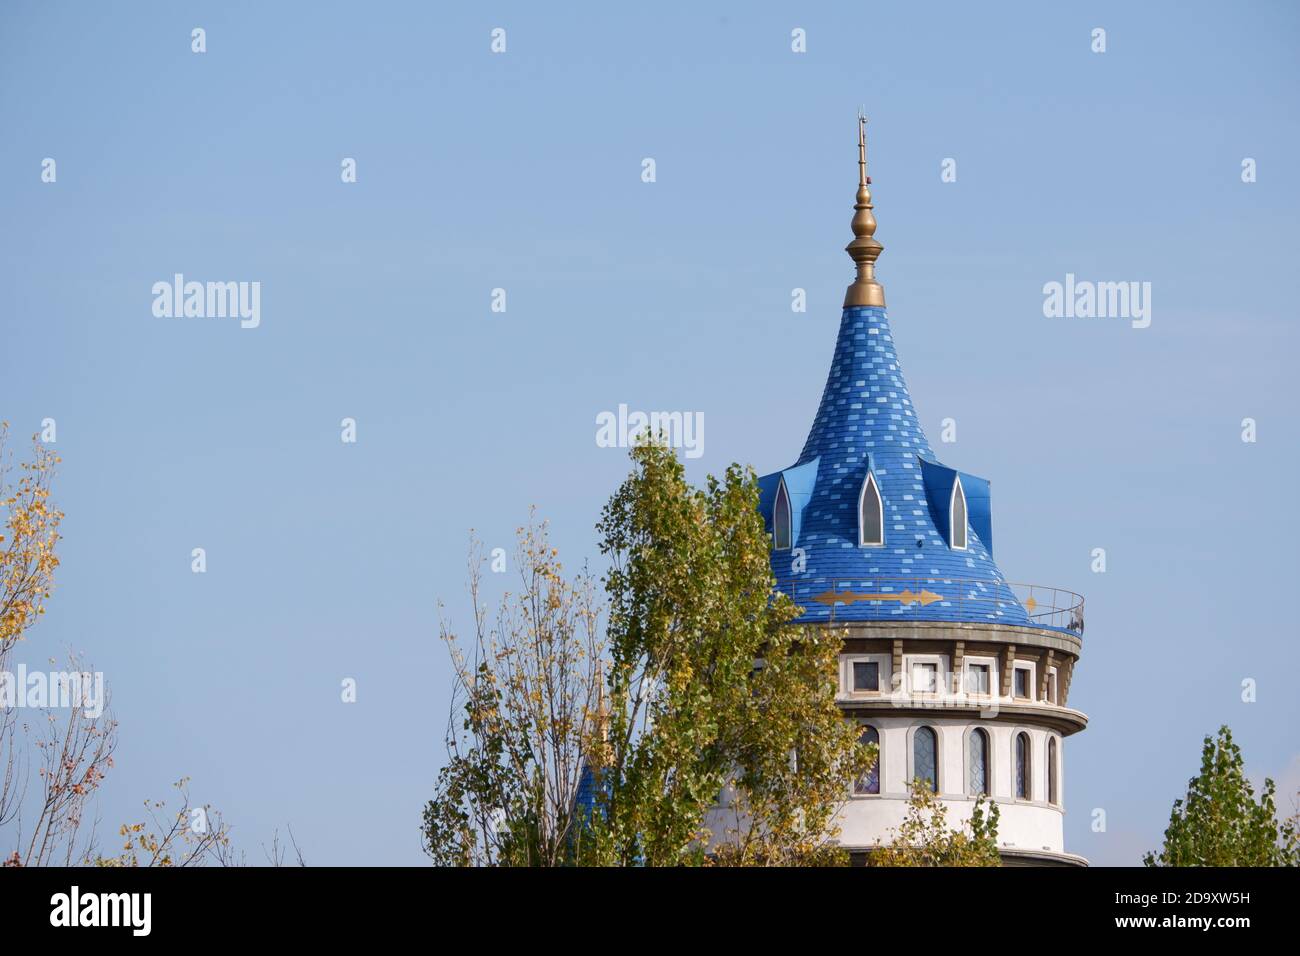 Fairytale Castle zoomed from distance Stock Photo